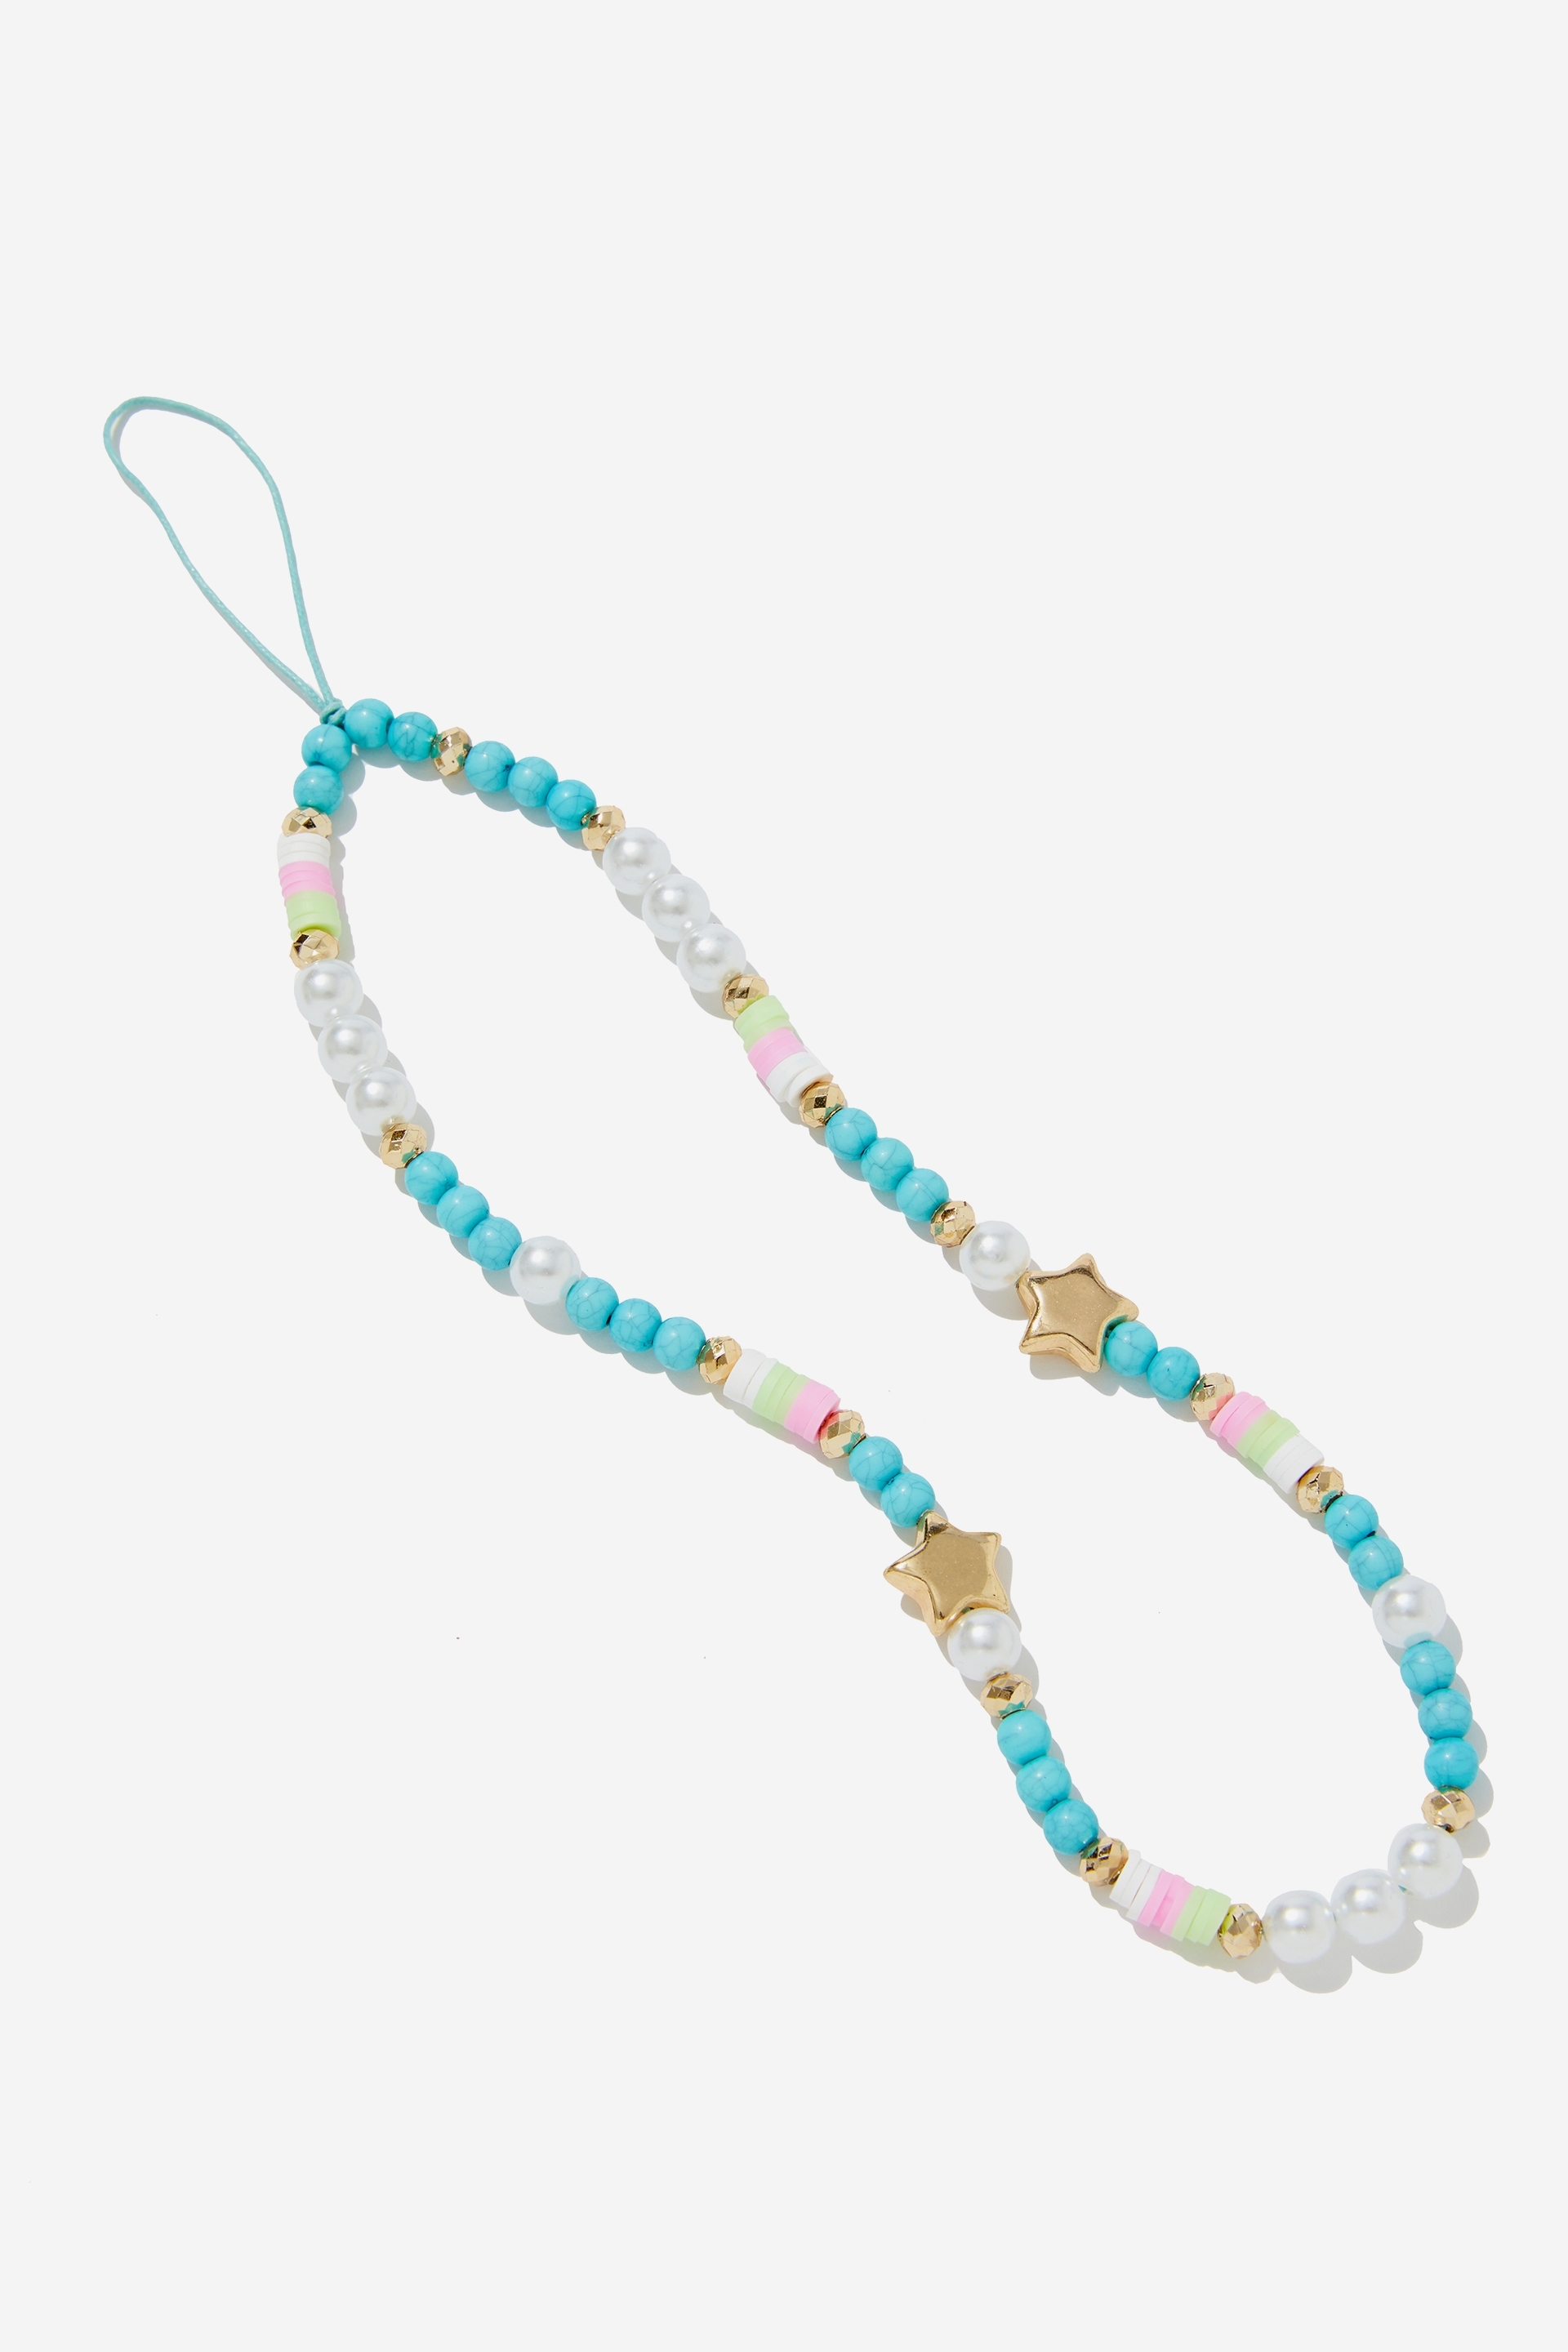 Typo - Carried Away Phone Charm Strap - Turquoise pearls